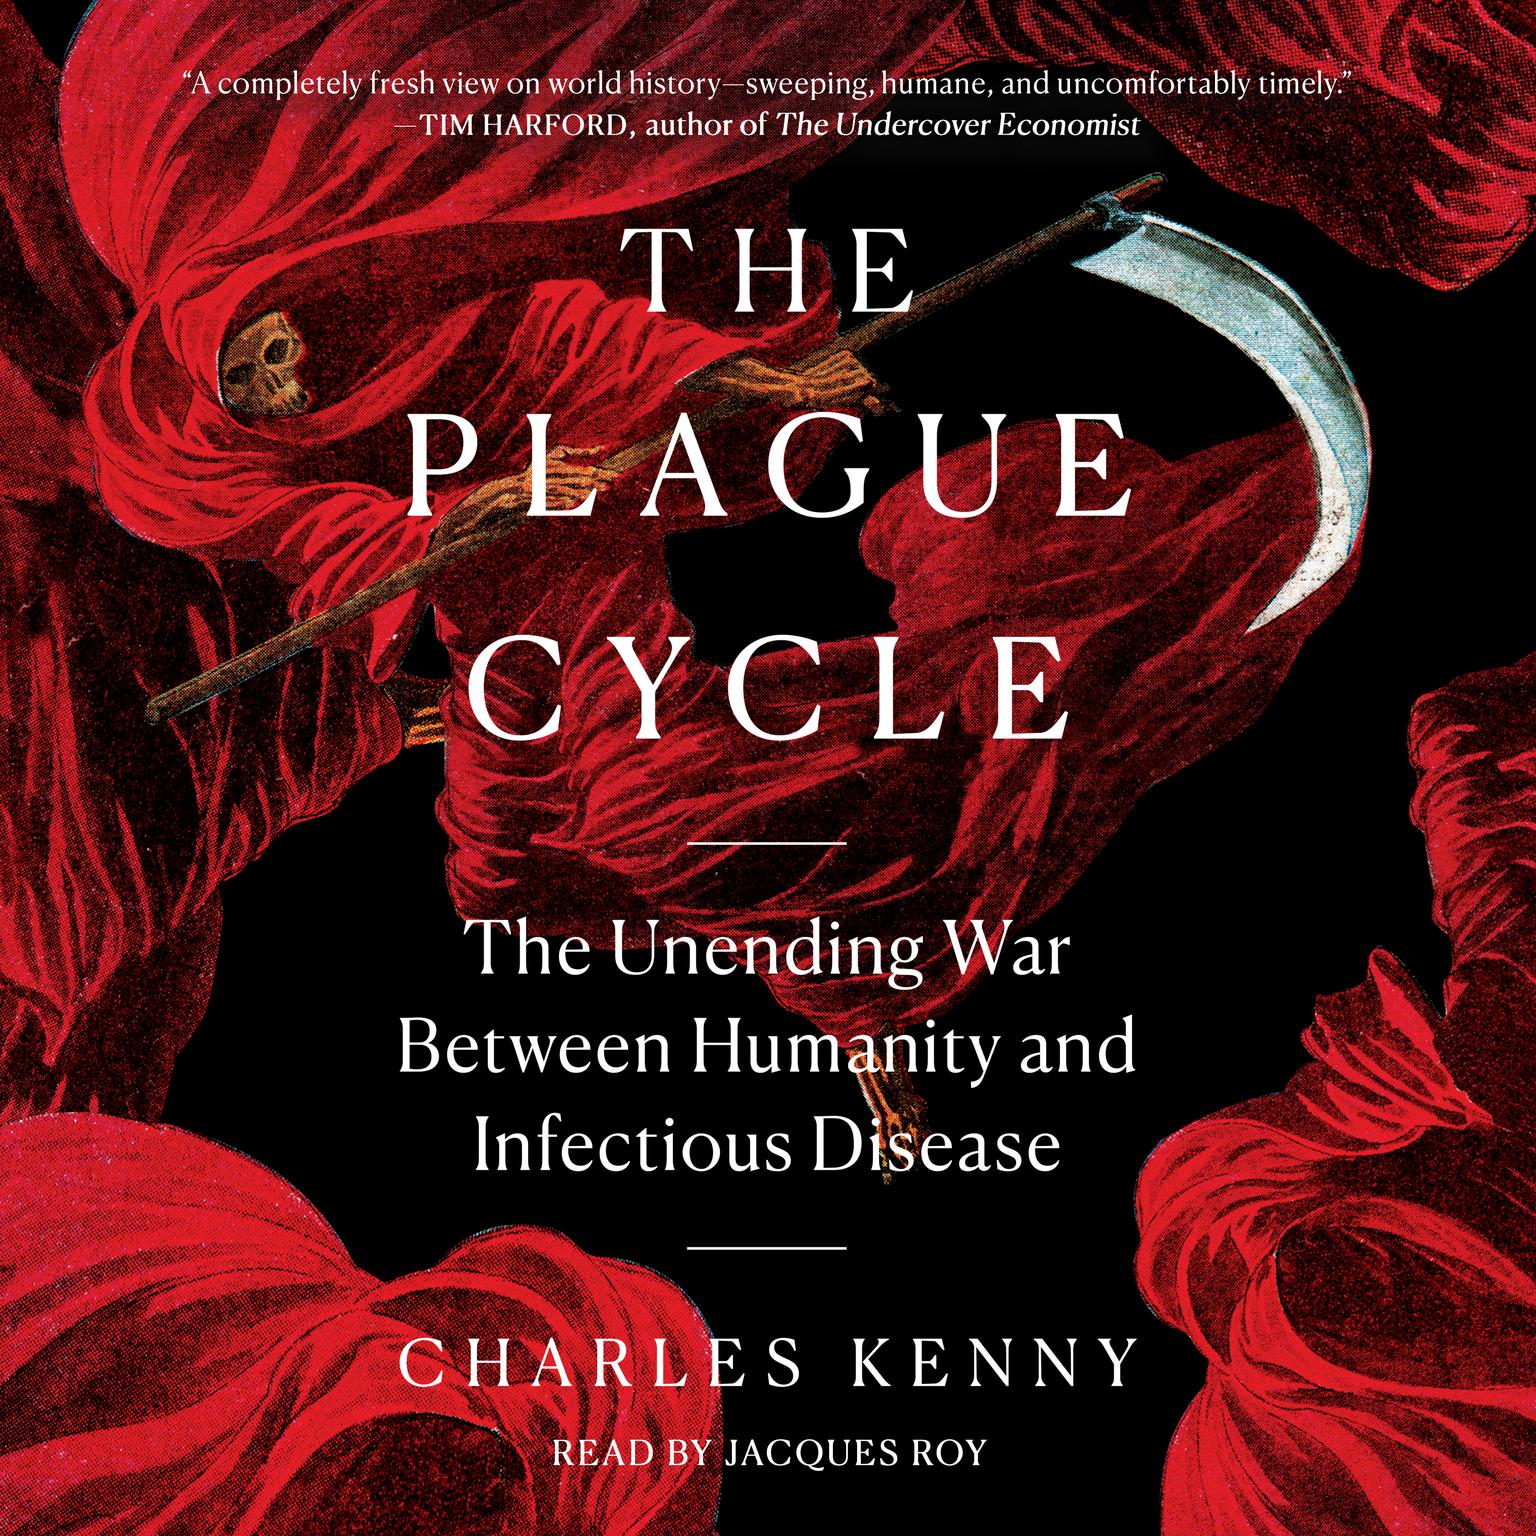 The Plague Cycle: The Unending War Between Humanity and Infectious Disease Audiobook, by Charles Kenny